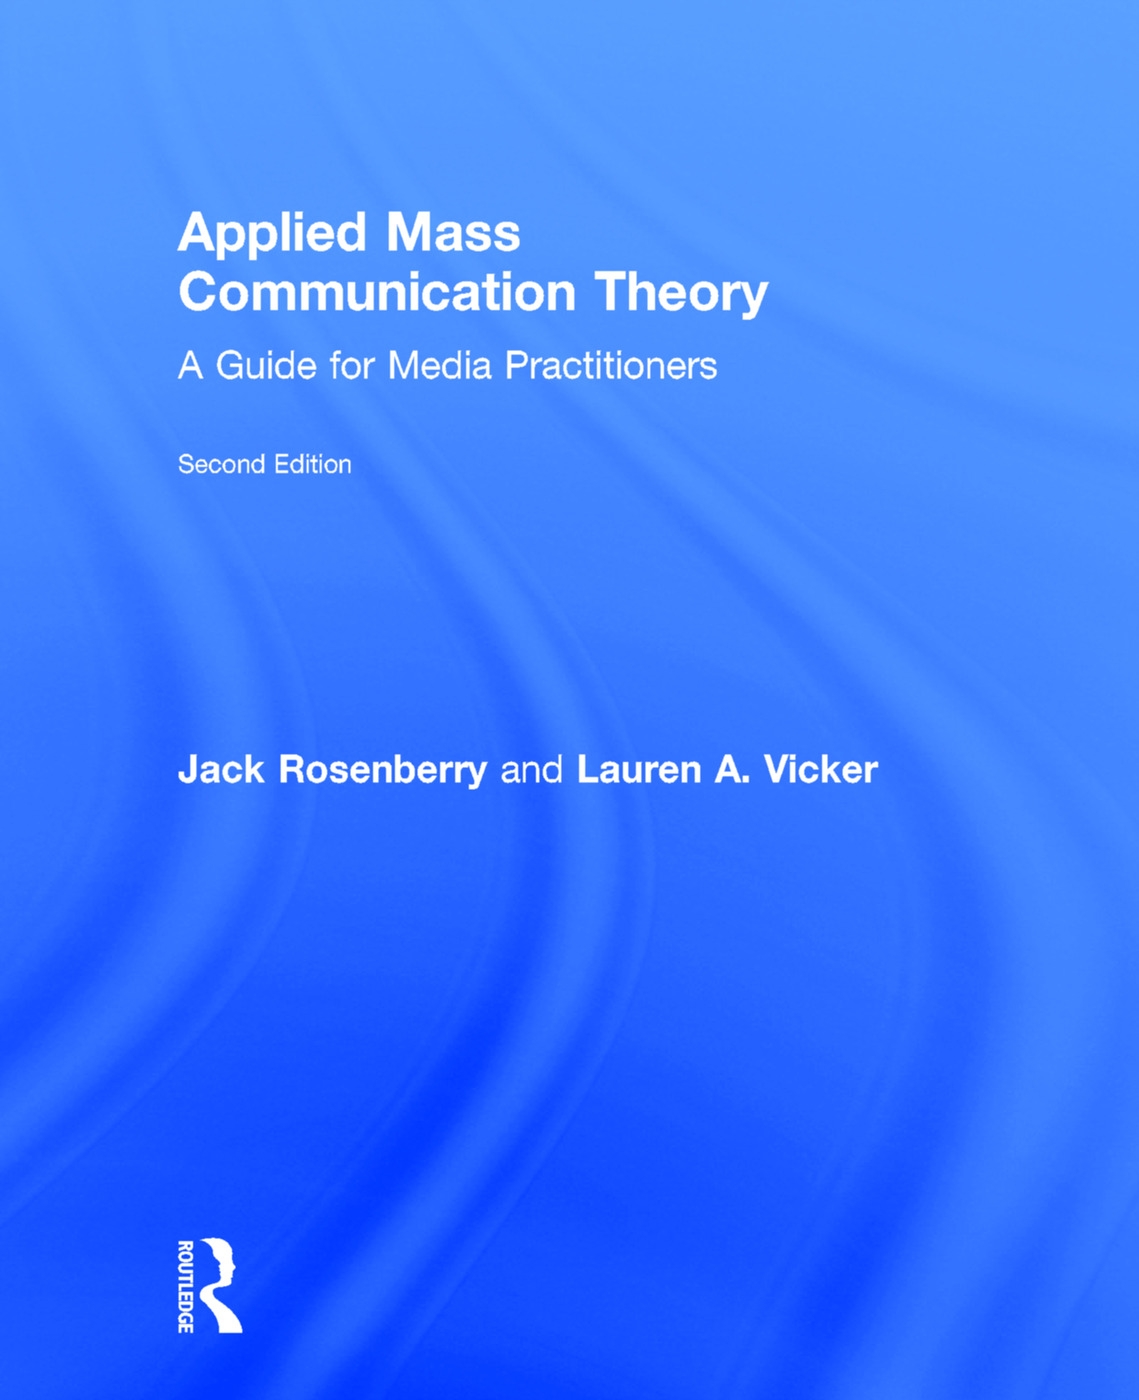 Applied Mass Communication Theory: A Guide for Media Practitioners